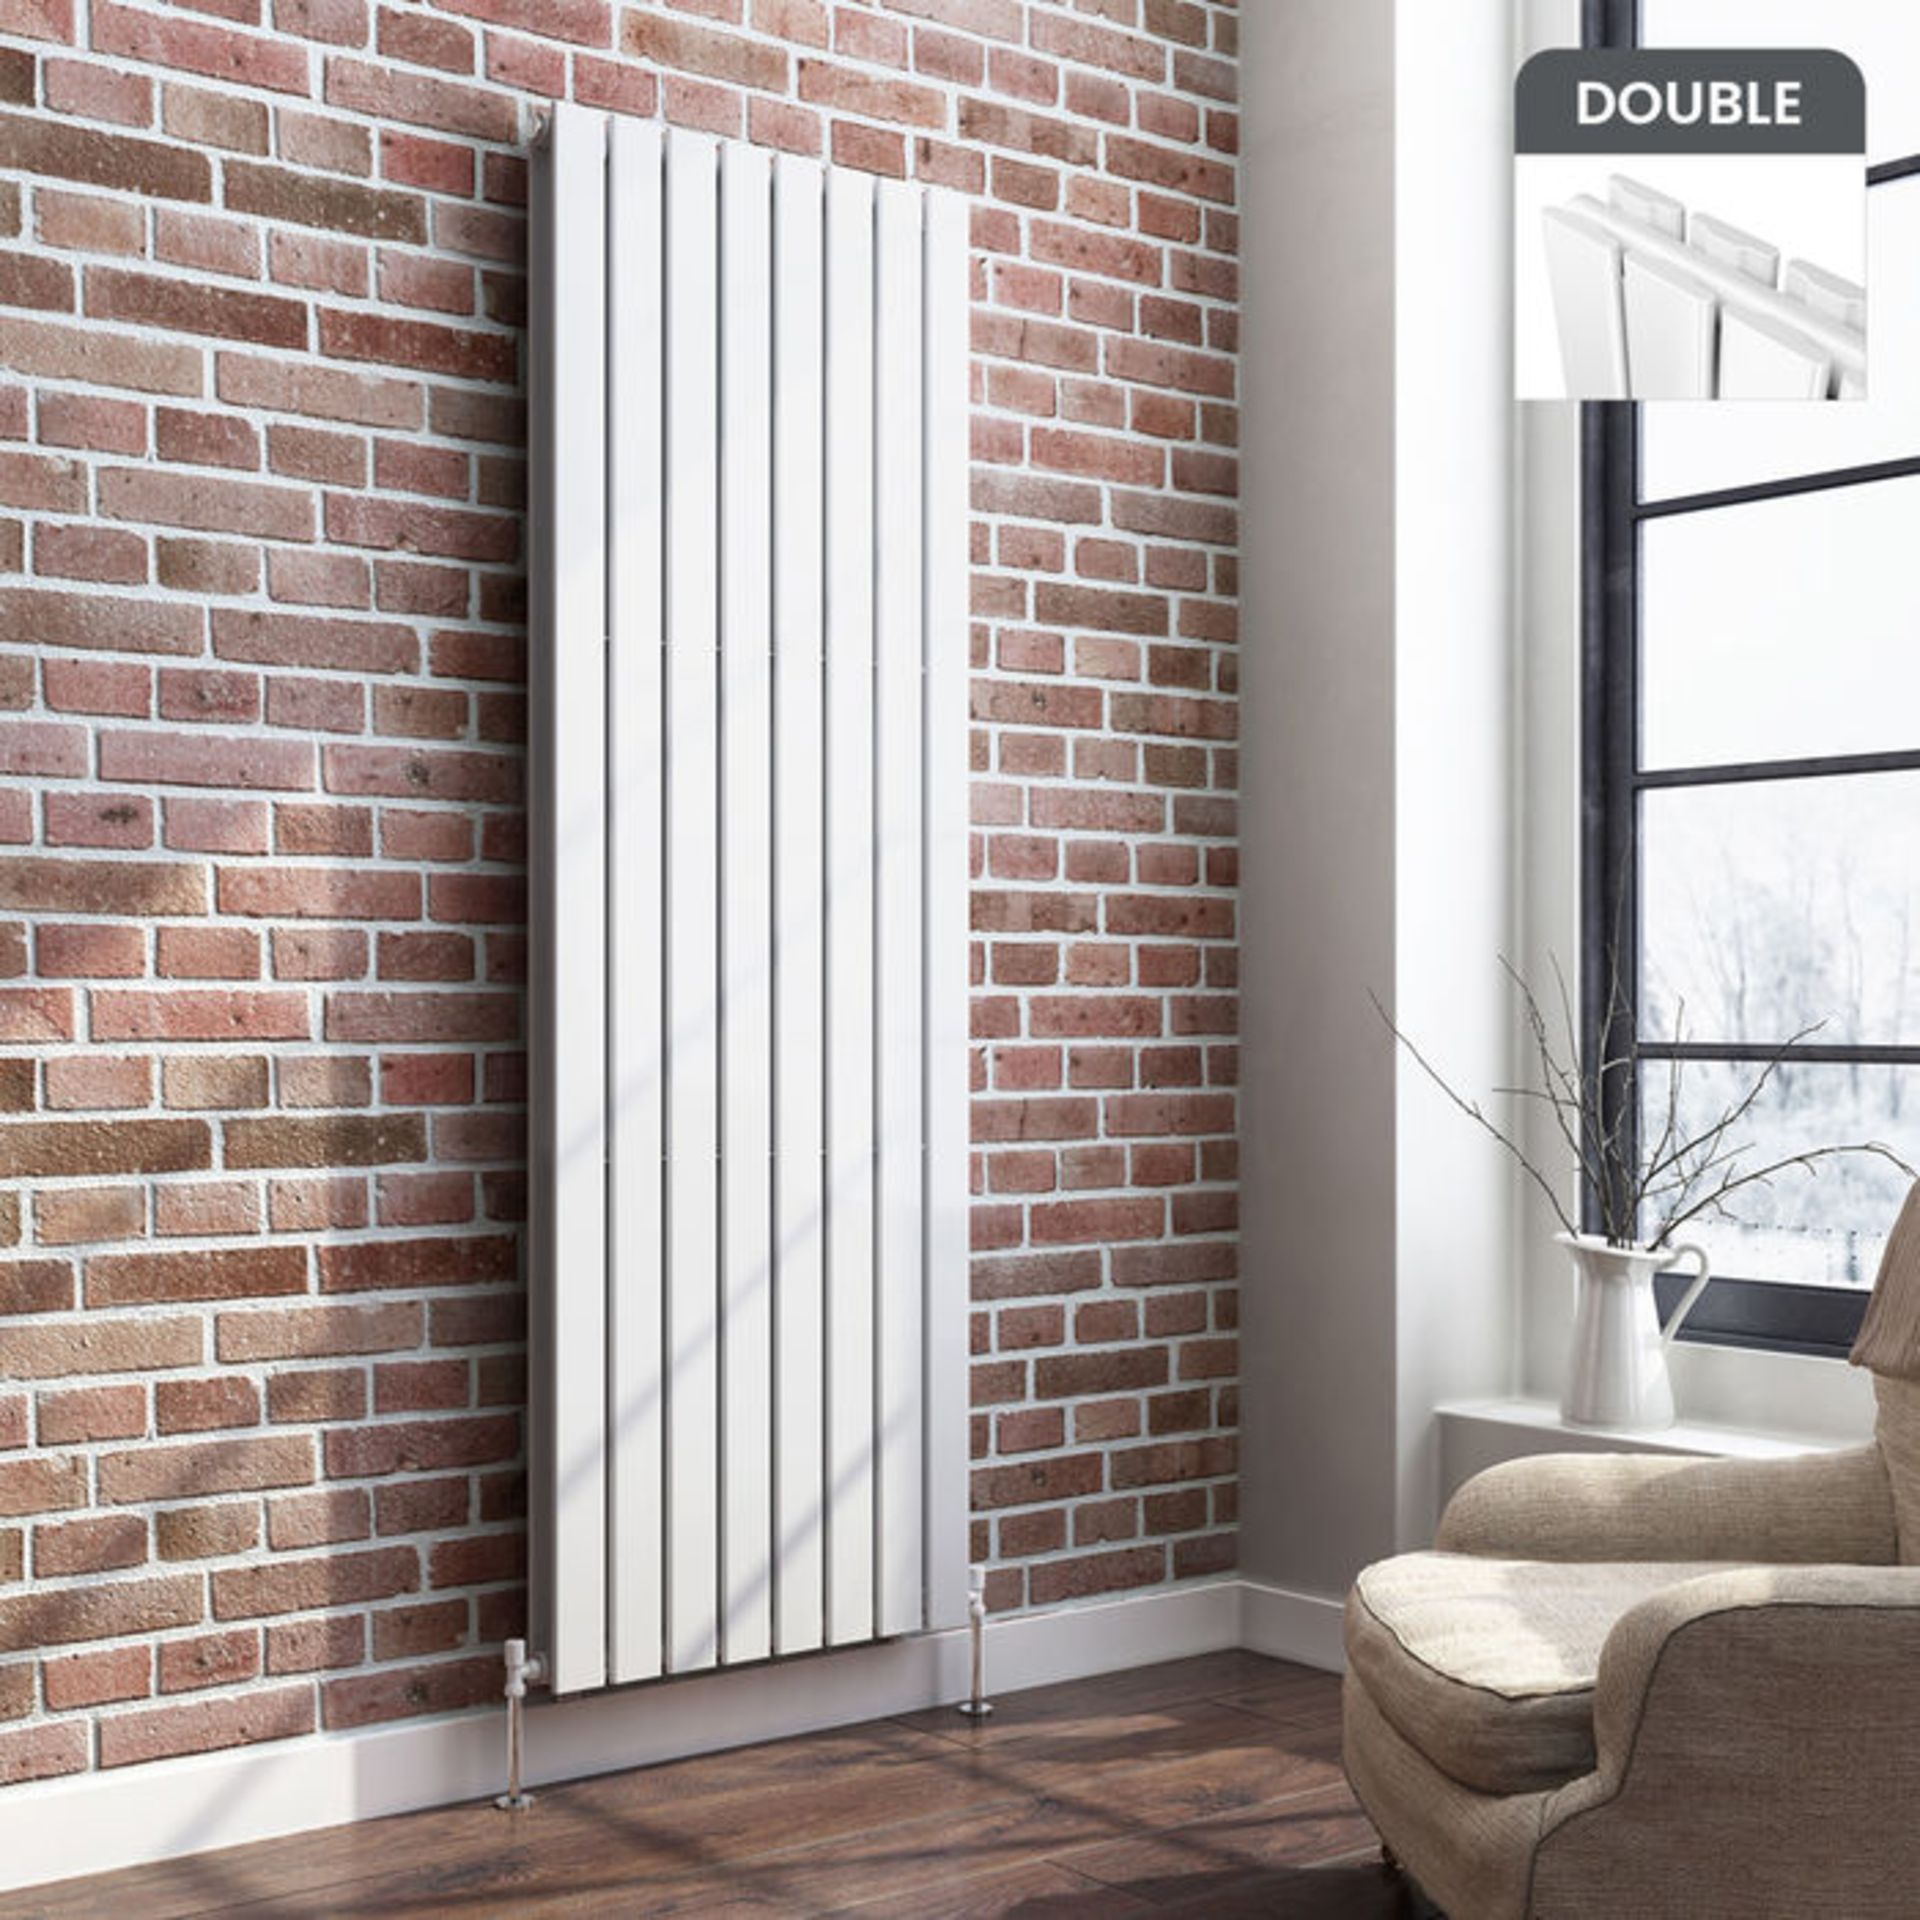 (AL190) 1800x608mm Gloss White Double Flat Panel Vertical Radiator - Premium. RRP £499.99. Made from